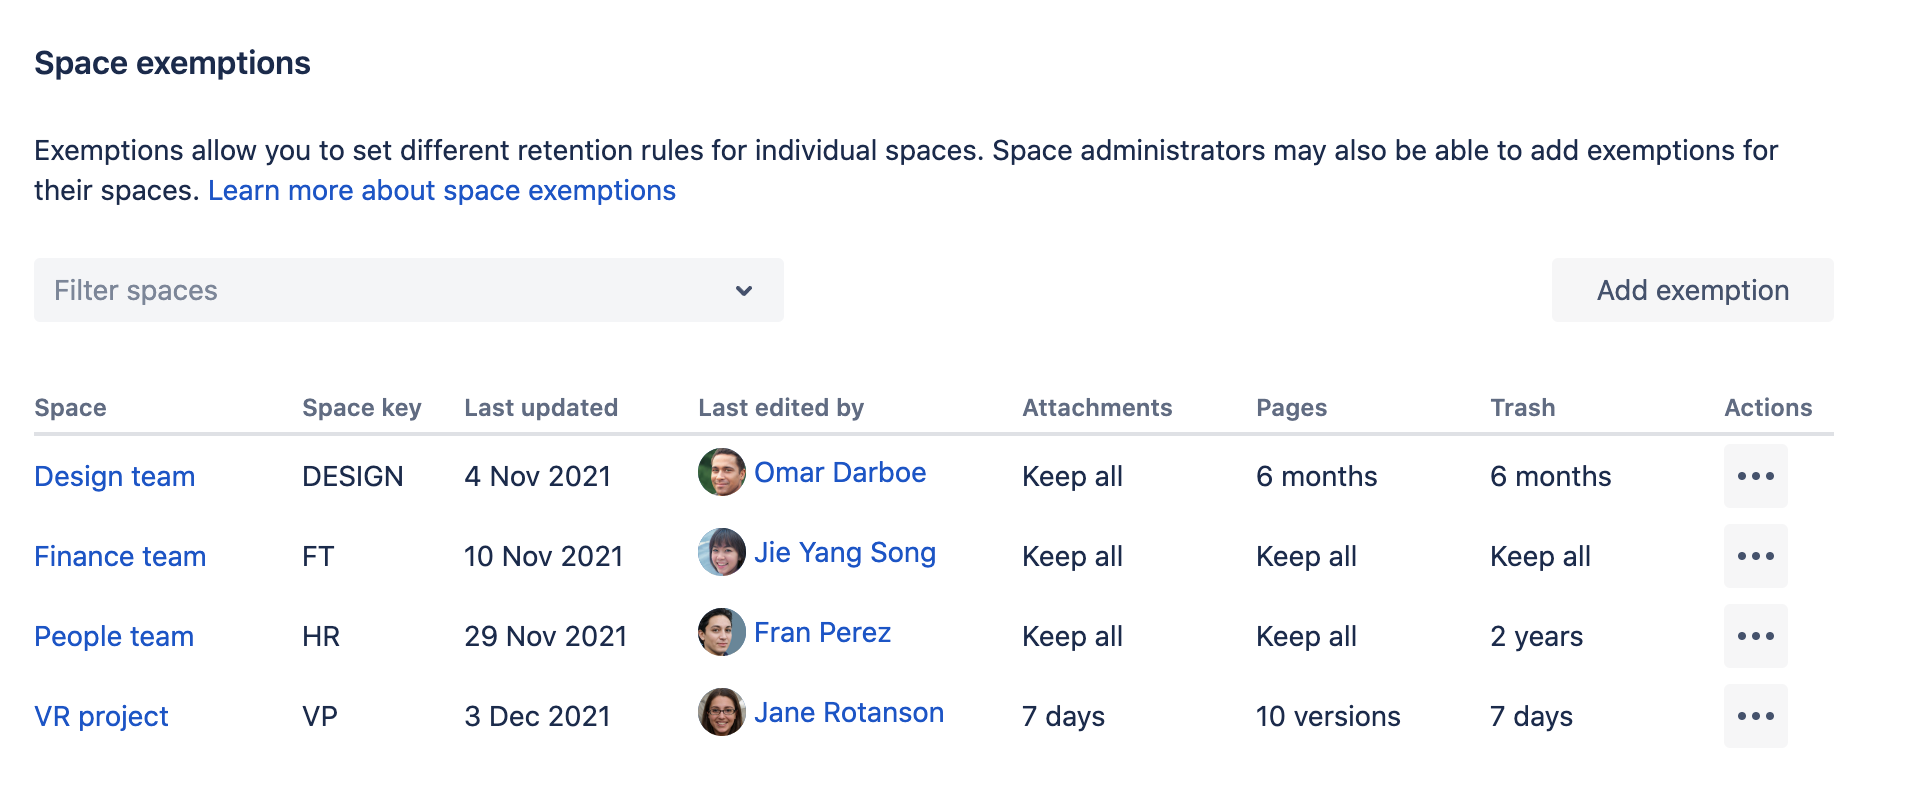 List of spaces exemptions showing rules set for each space